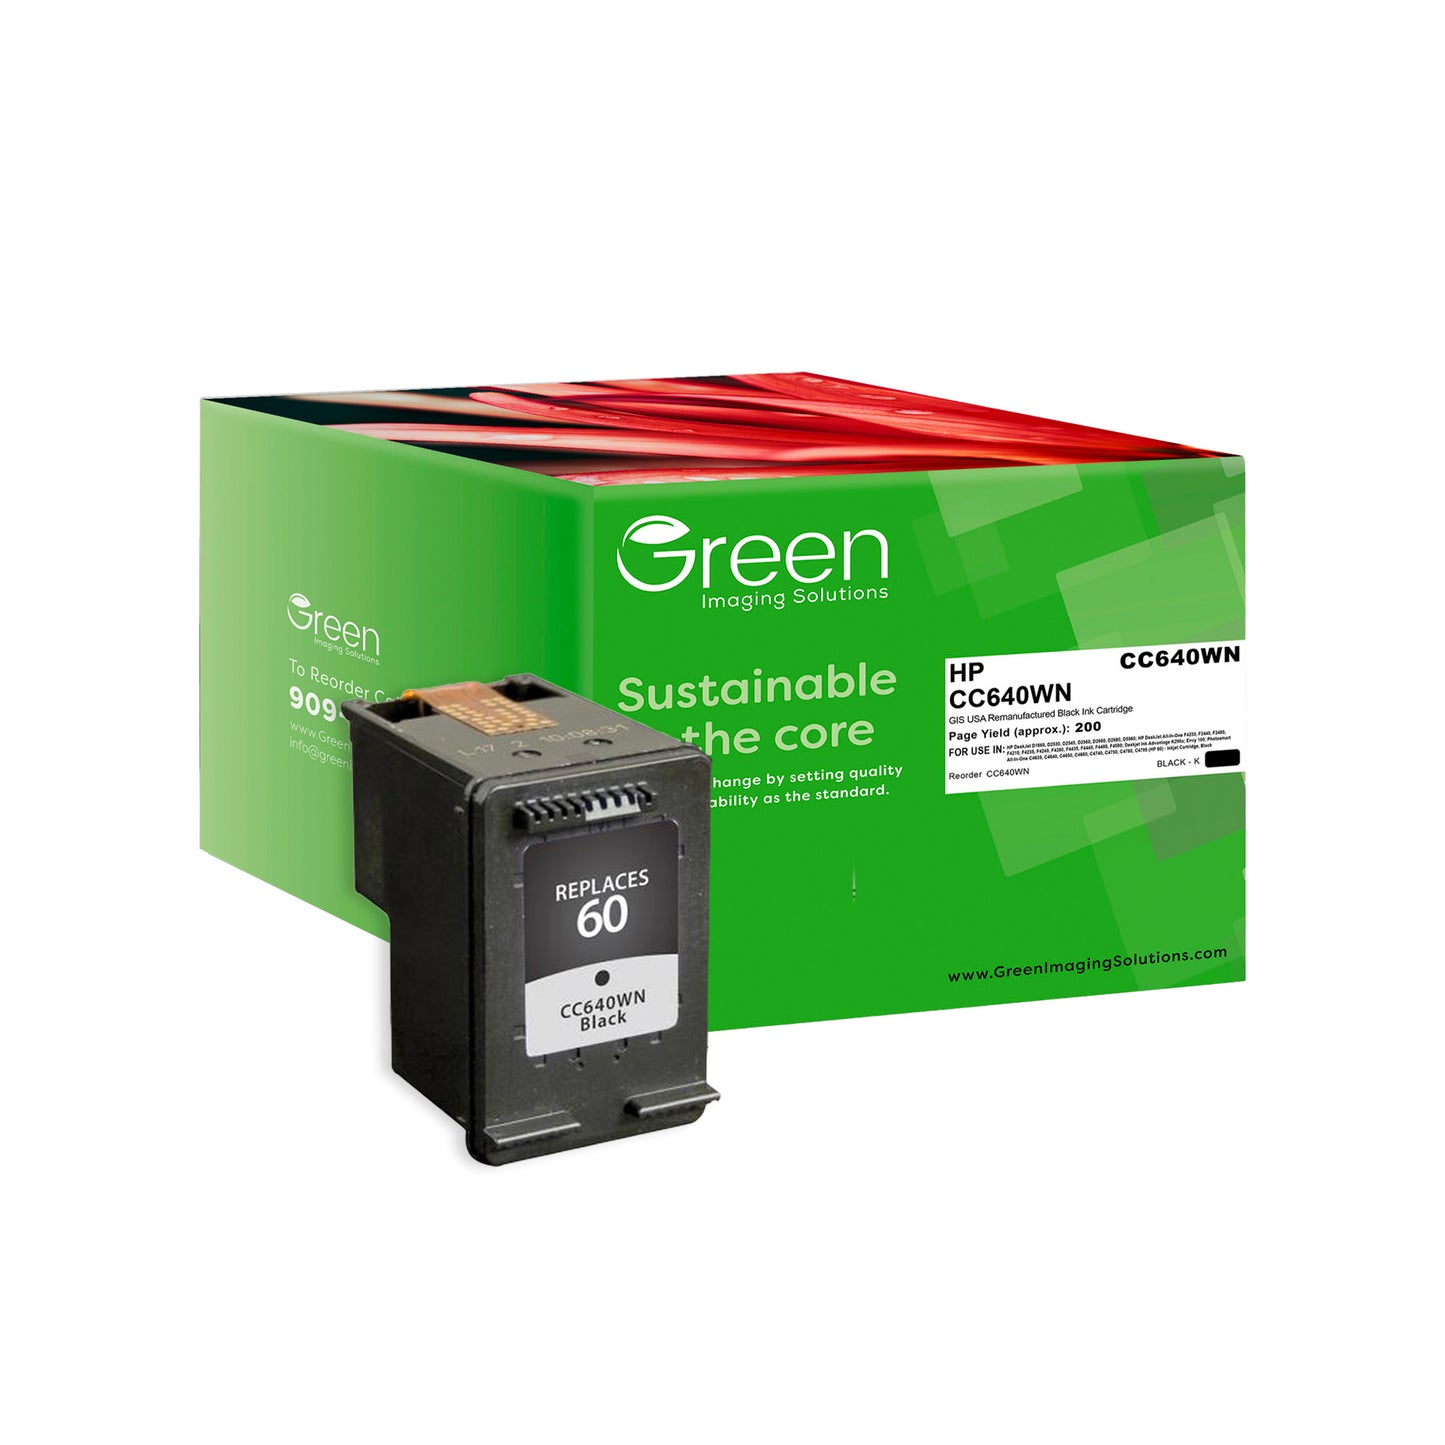 Green Imaging Solutions USA Remanufactured Black Ink Cartridge for HP 60 (CC640WN)